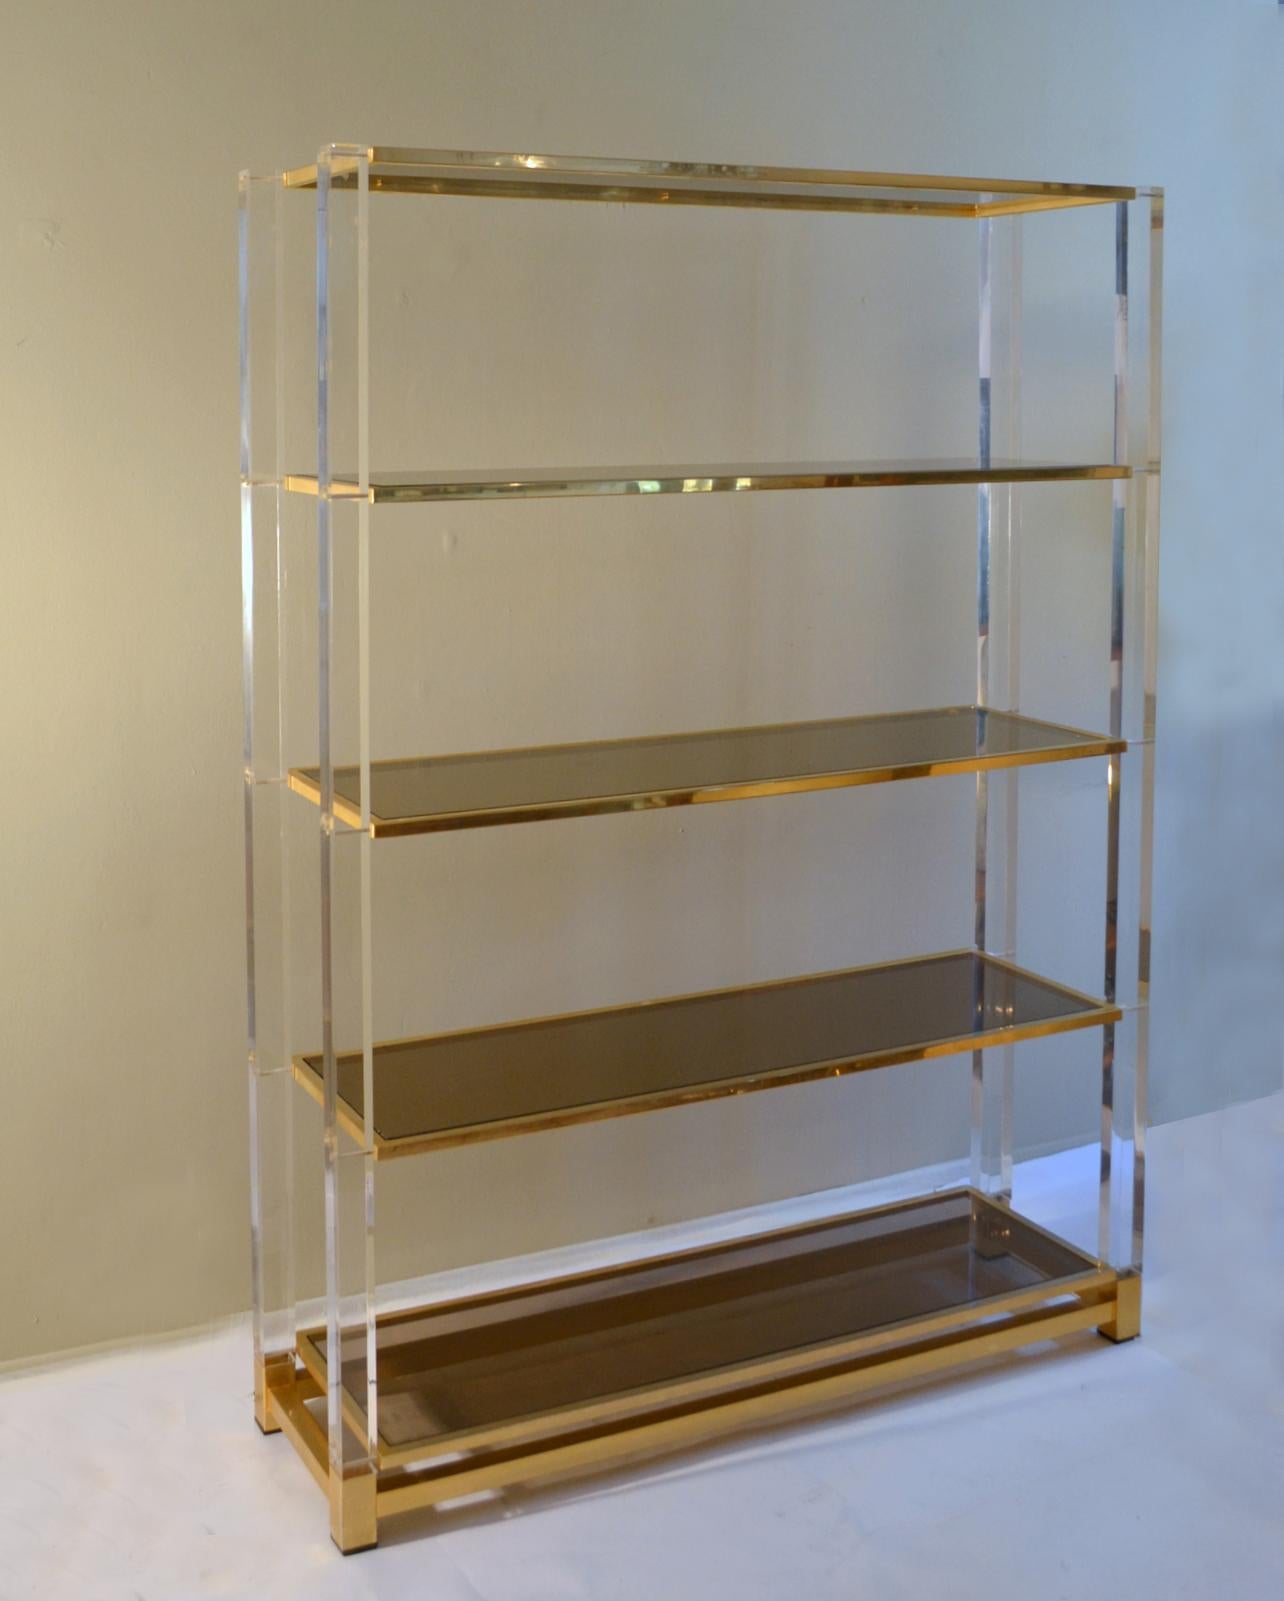 Illuminated Lucite and brass étagère/shelving unit with five smoke glass shelves with brass borders is designed by Charles Hollis Jones, known as the “Incredible Mister Lucite” with his studio based in L.A. This shelving unit is part of the 